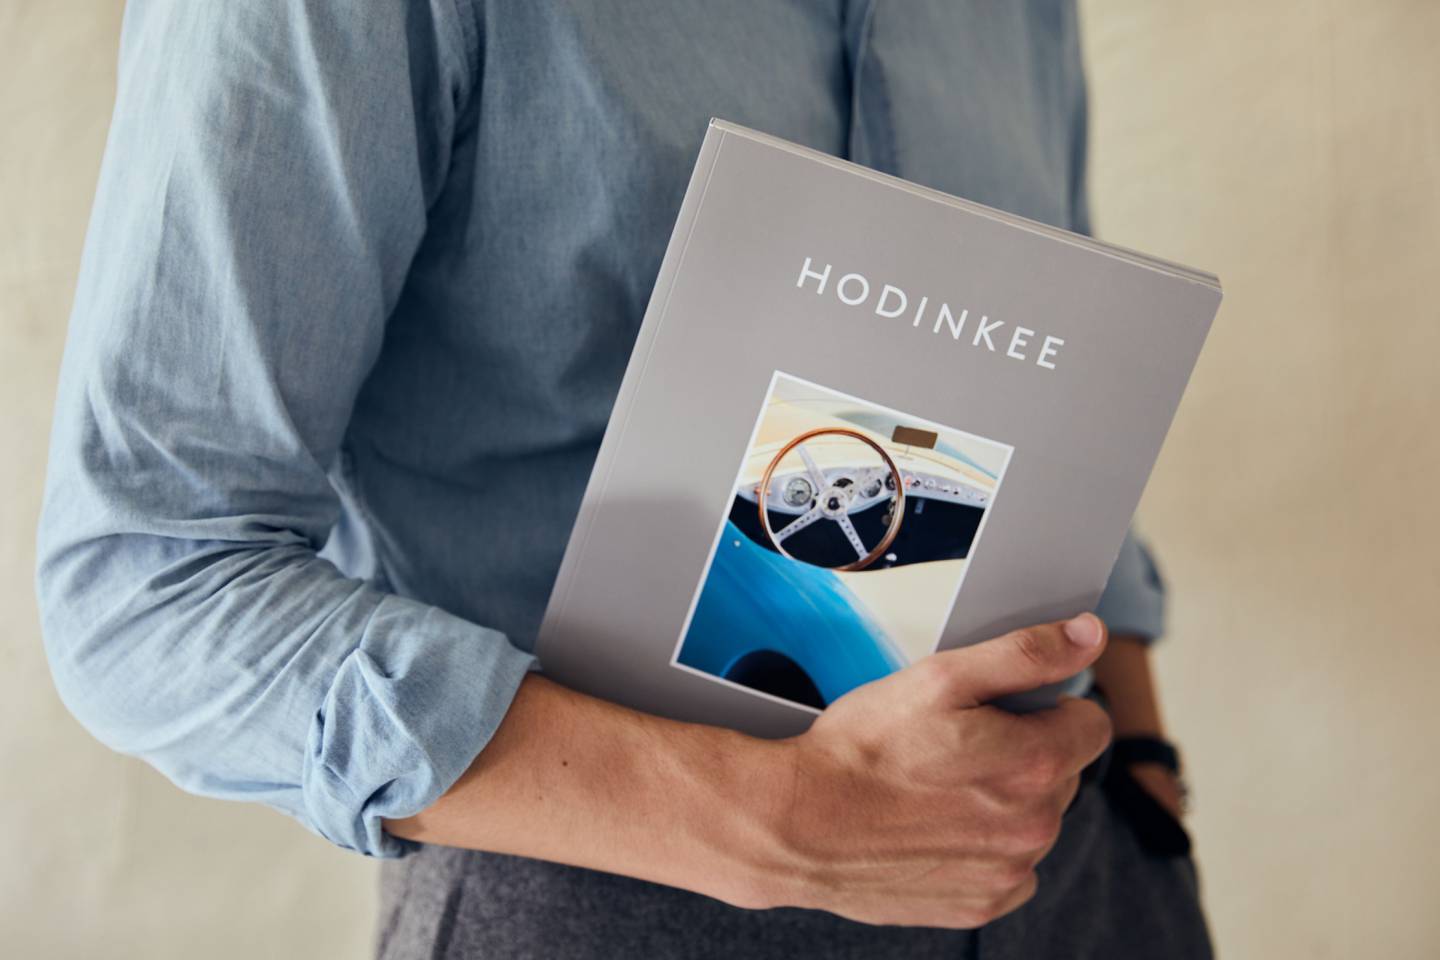 Hodinkee launched a biannual print magazine in 2017.